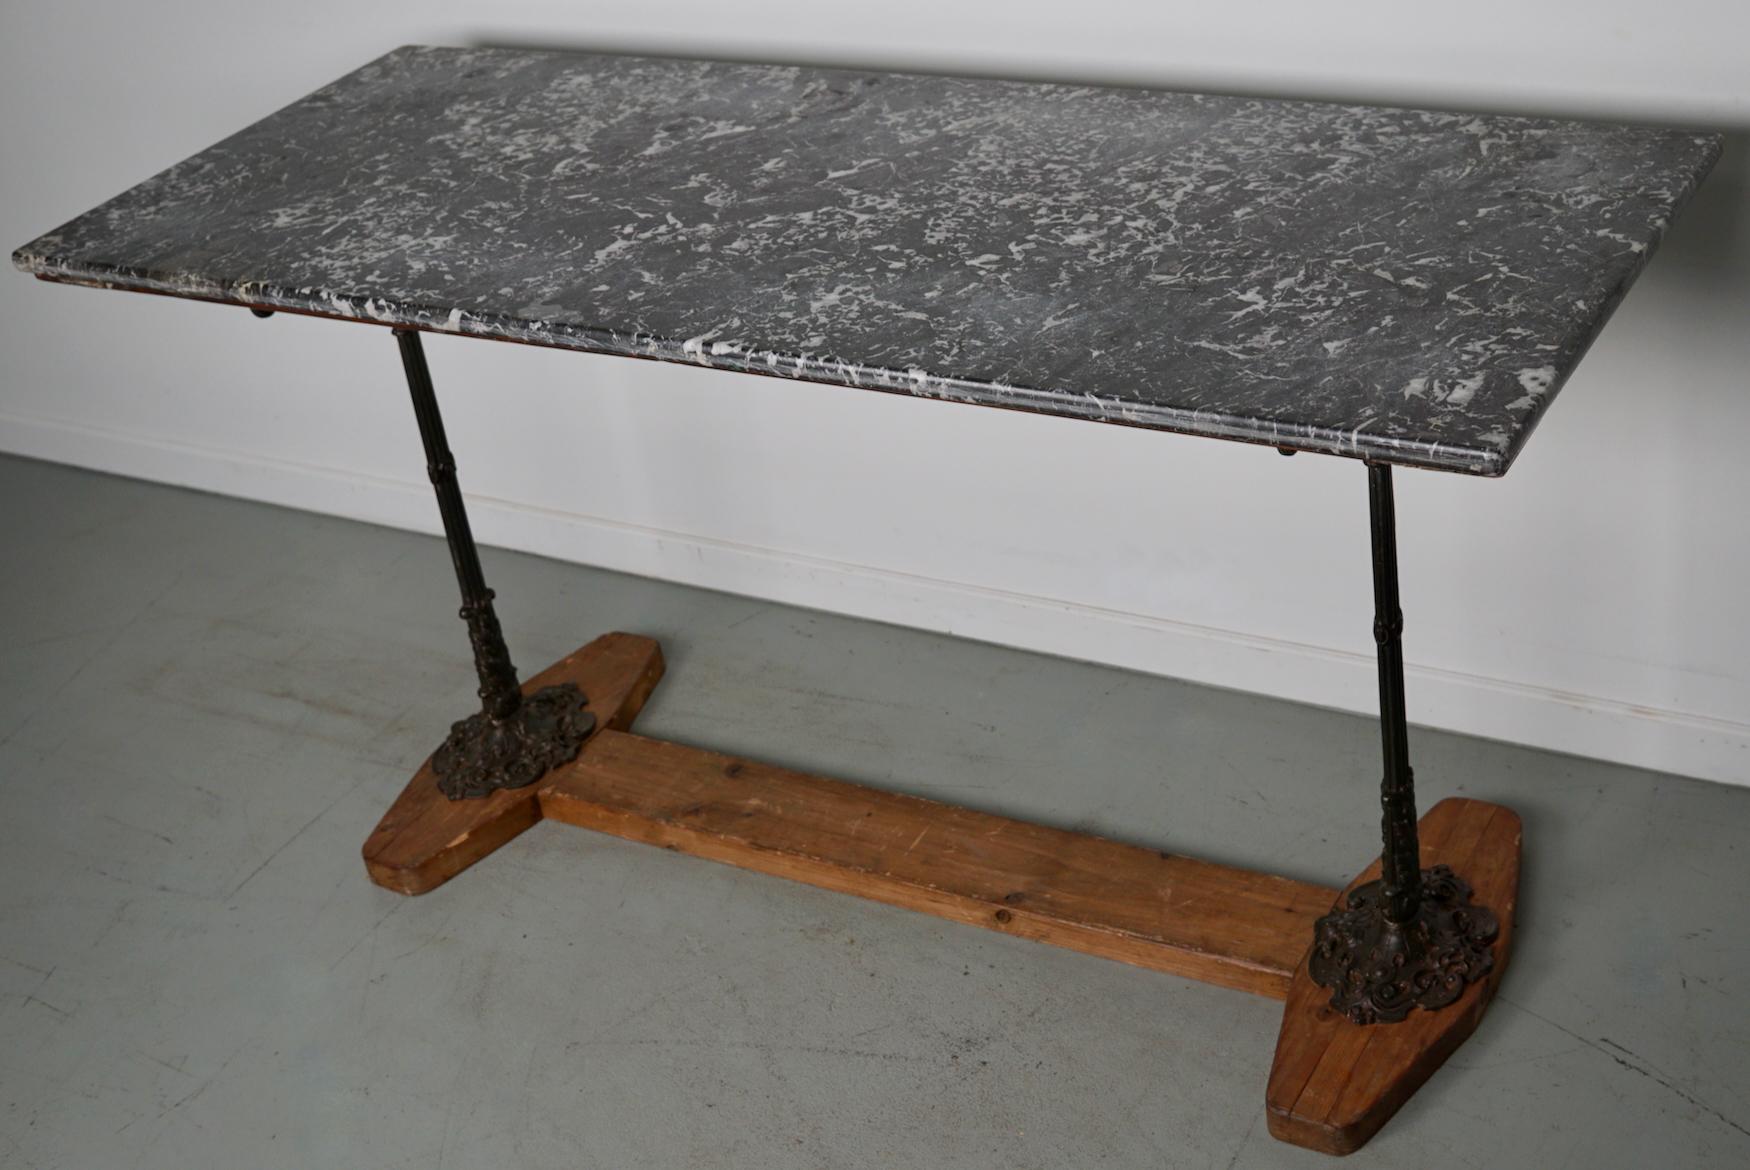 This French console table was designed and made circa late 19th century from marble and cast iron. It remains in a very good condition. It can be used as a display table in a shop or as a side table. The legs are now mounted to a wooden base but